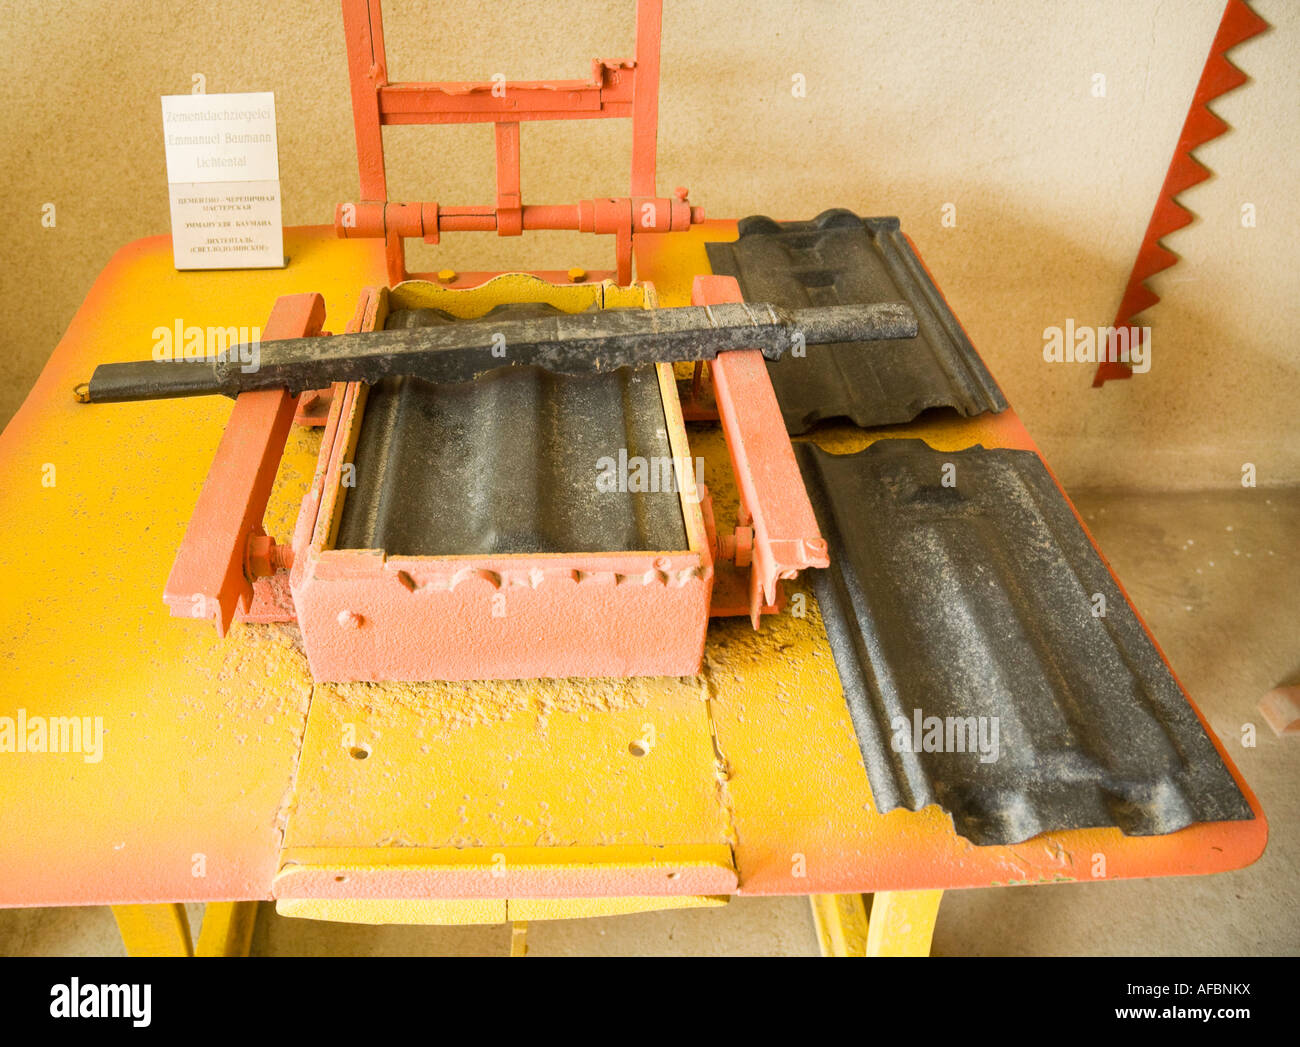 A device for producing cement roof tiles at the farmers museum in the former Bessarabian Friedenstal, now Mirnopolje / Ukraine Stock Photo